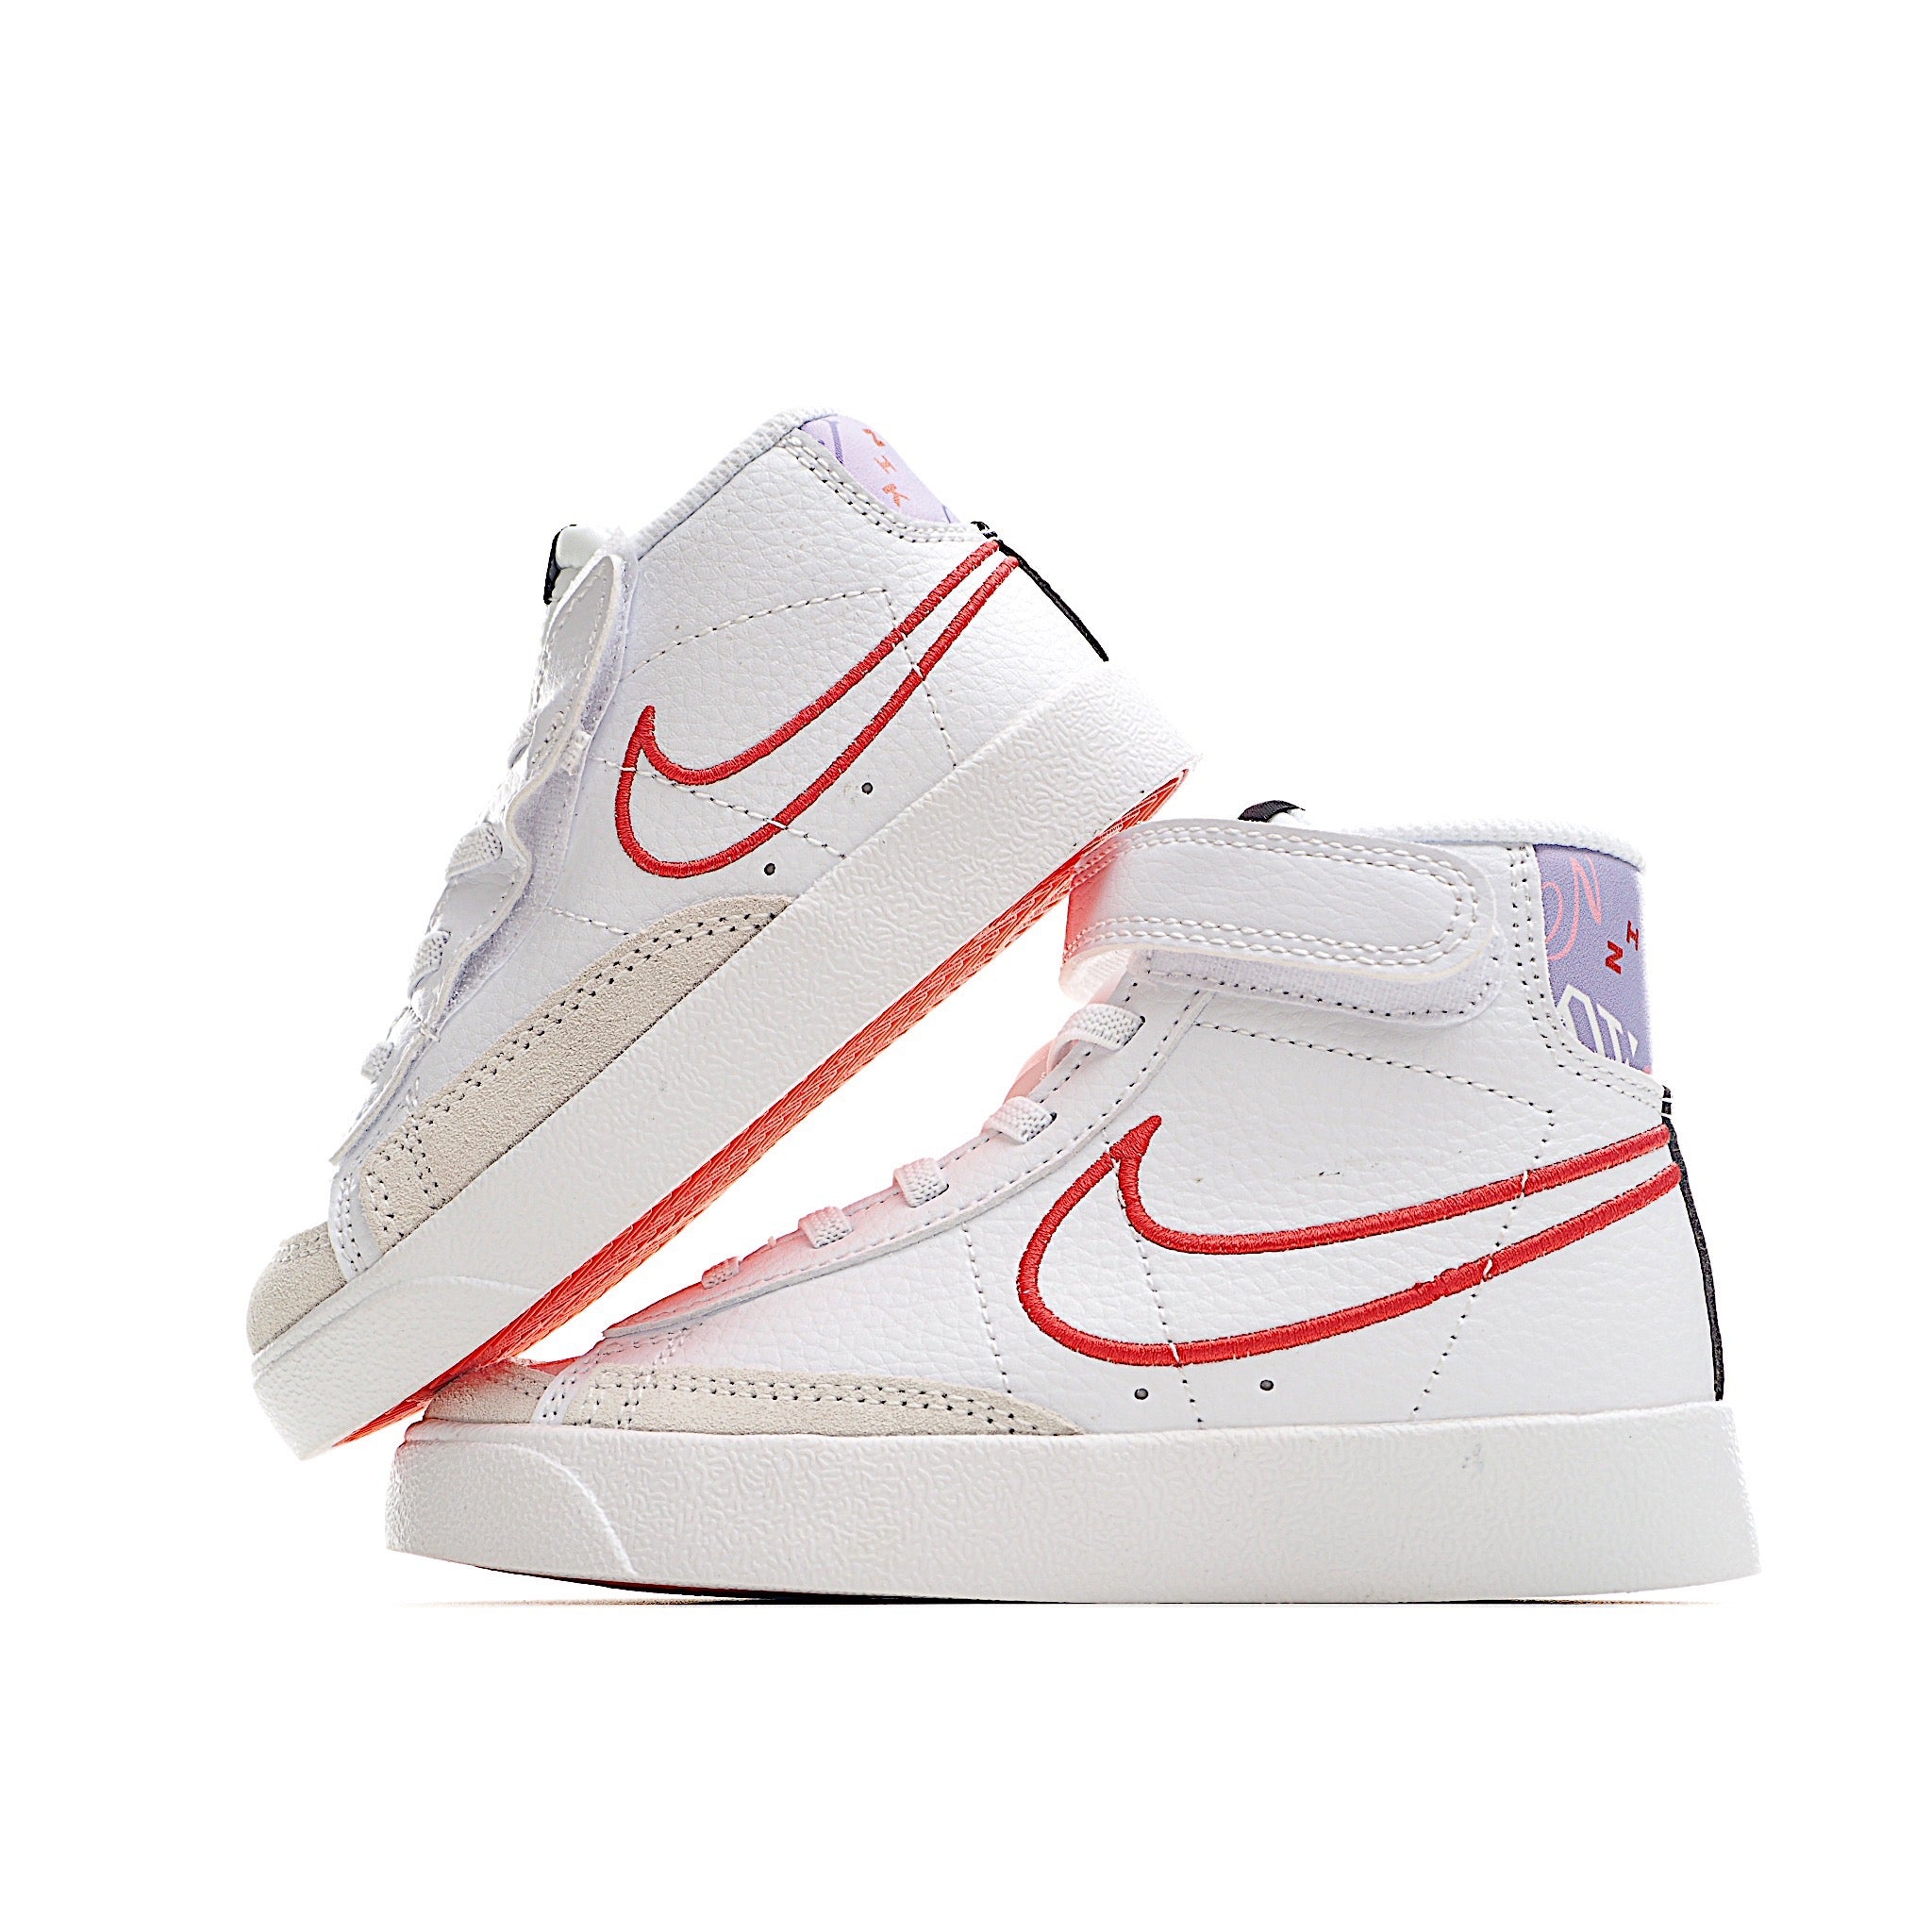 Nike high blazer purple and red shoes